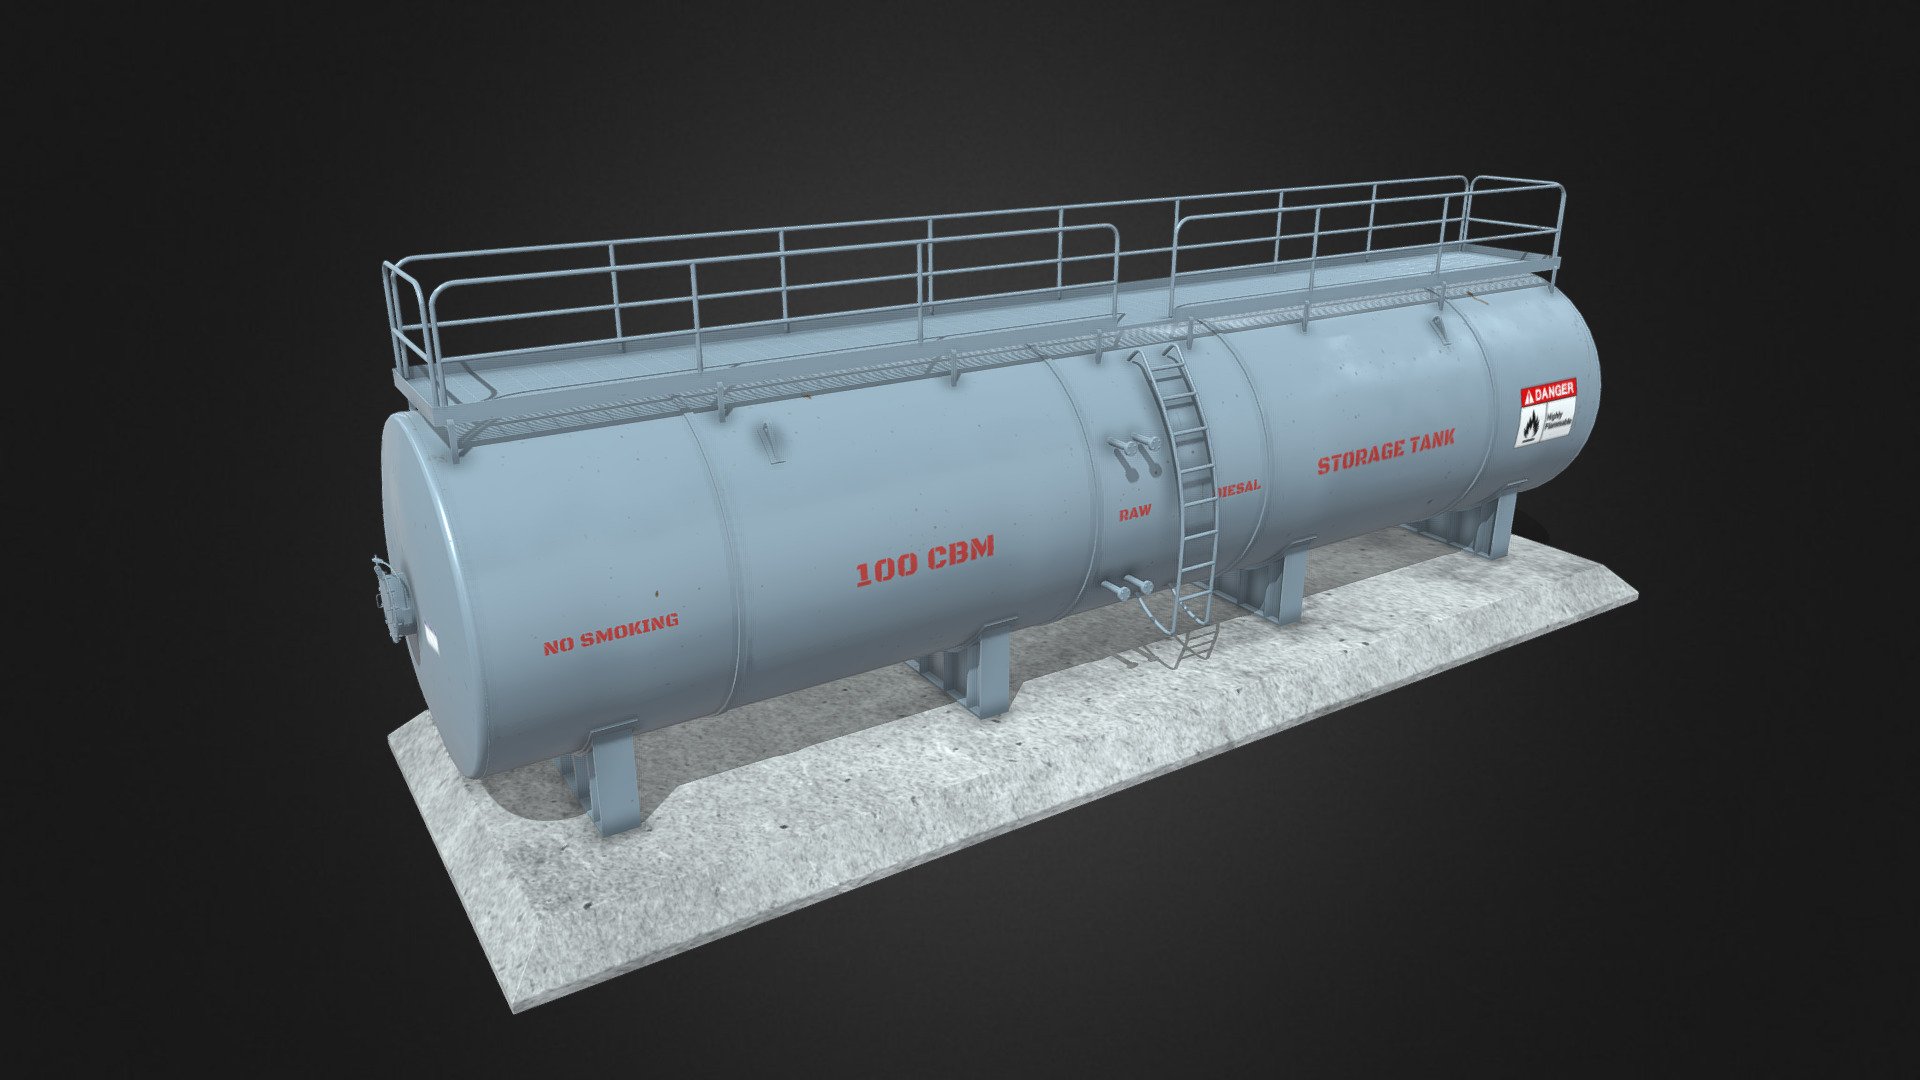 This is amodel of industrial oil storage tank. it was originally created with blender and textured in substane painter. This model was scaled to real world size 3d model